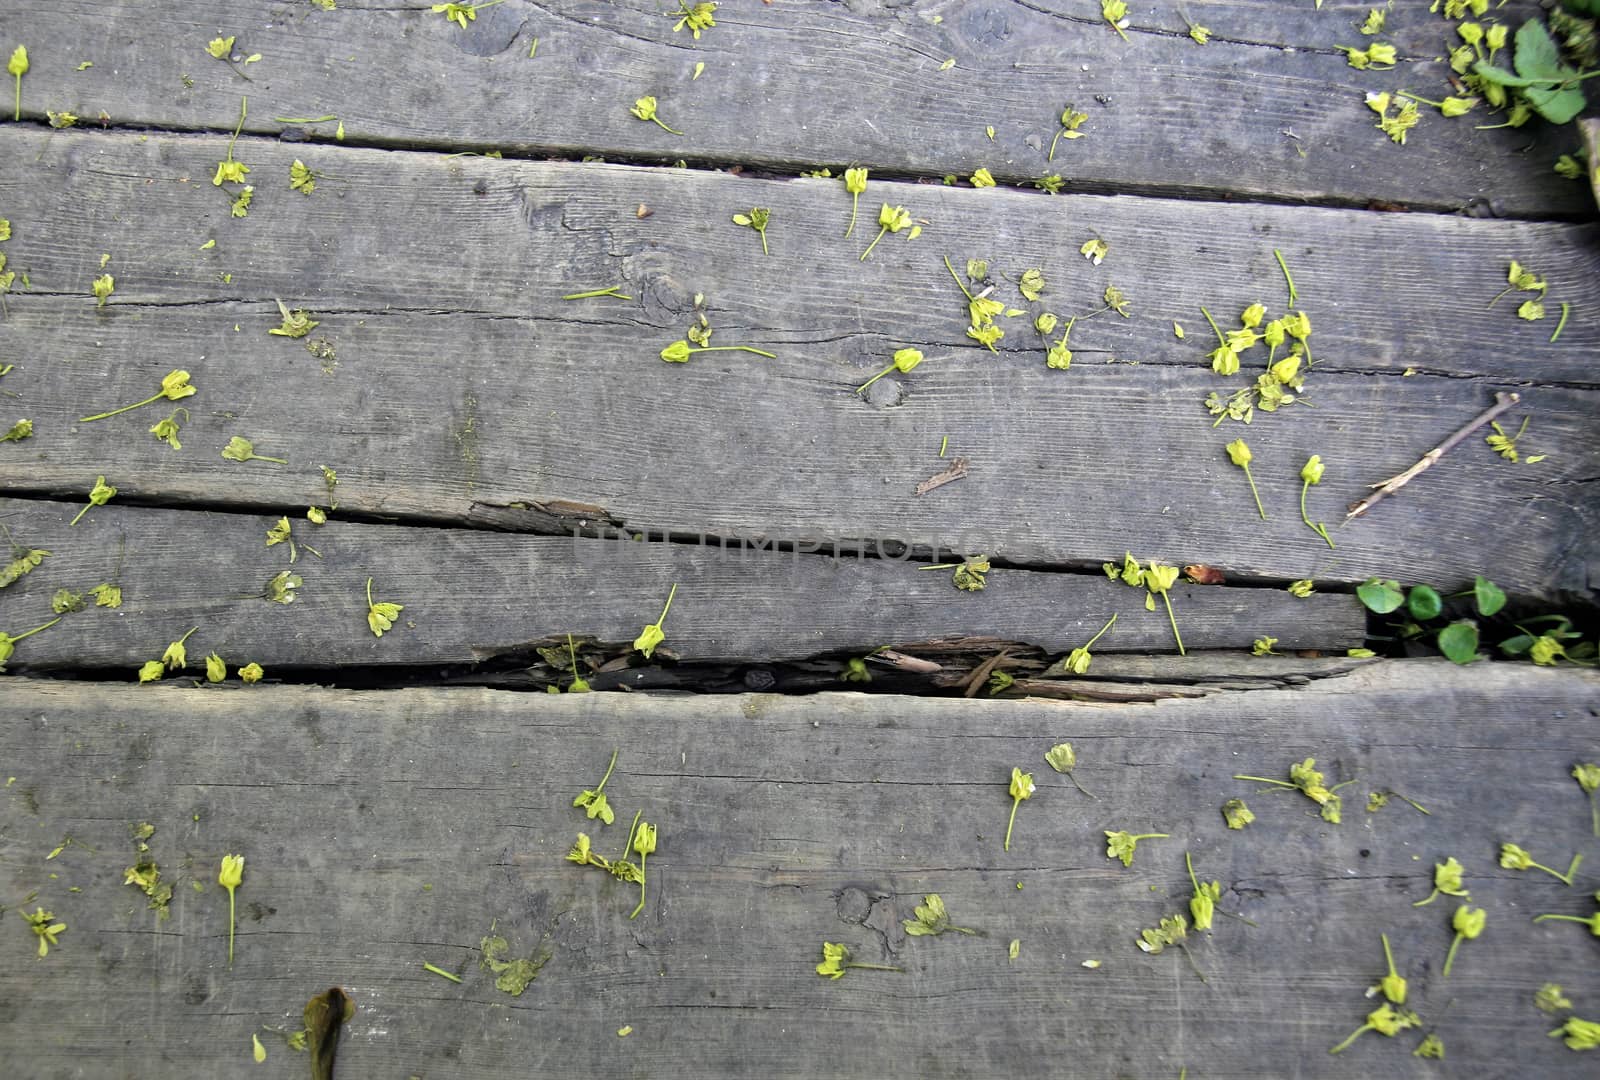 texture of a wooden walkway in the garden, strewn with spring green flowers from trees, natural background